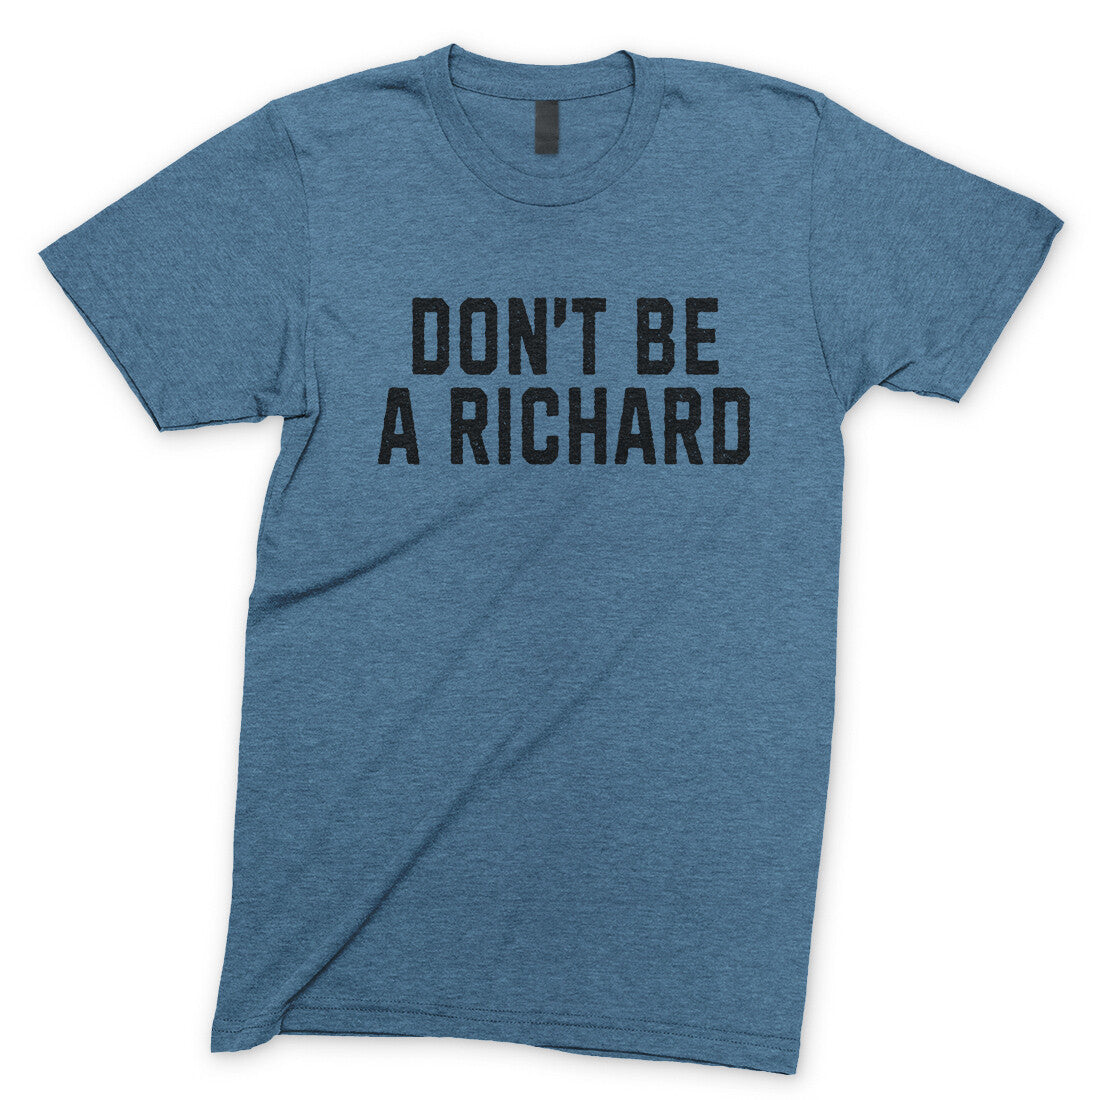 Don't Be a Richard in Heather Indigo Color